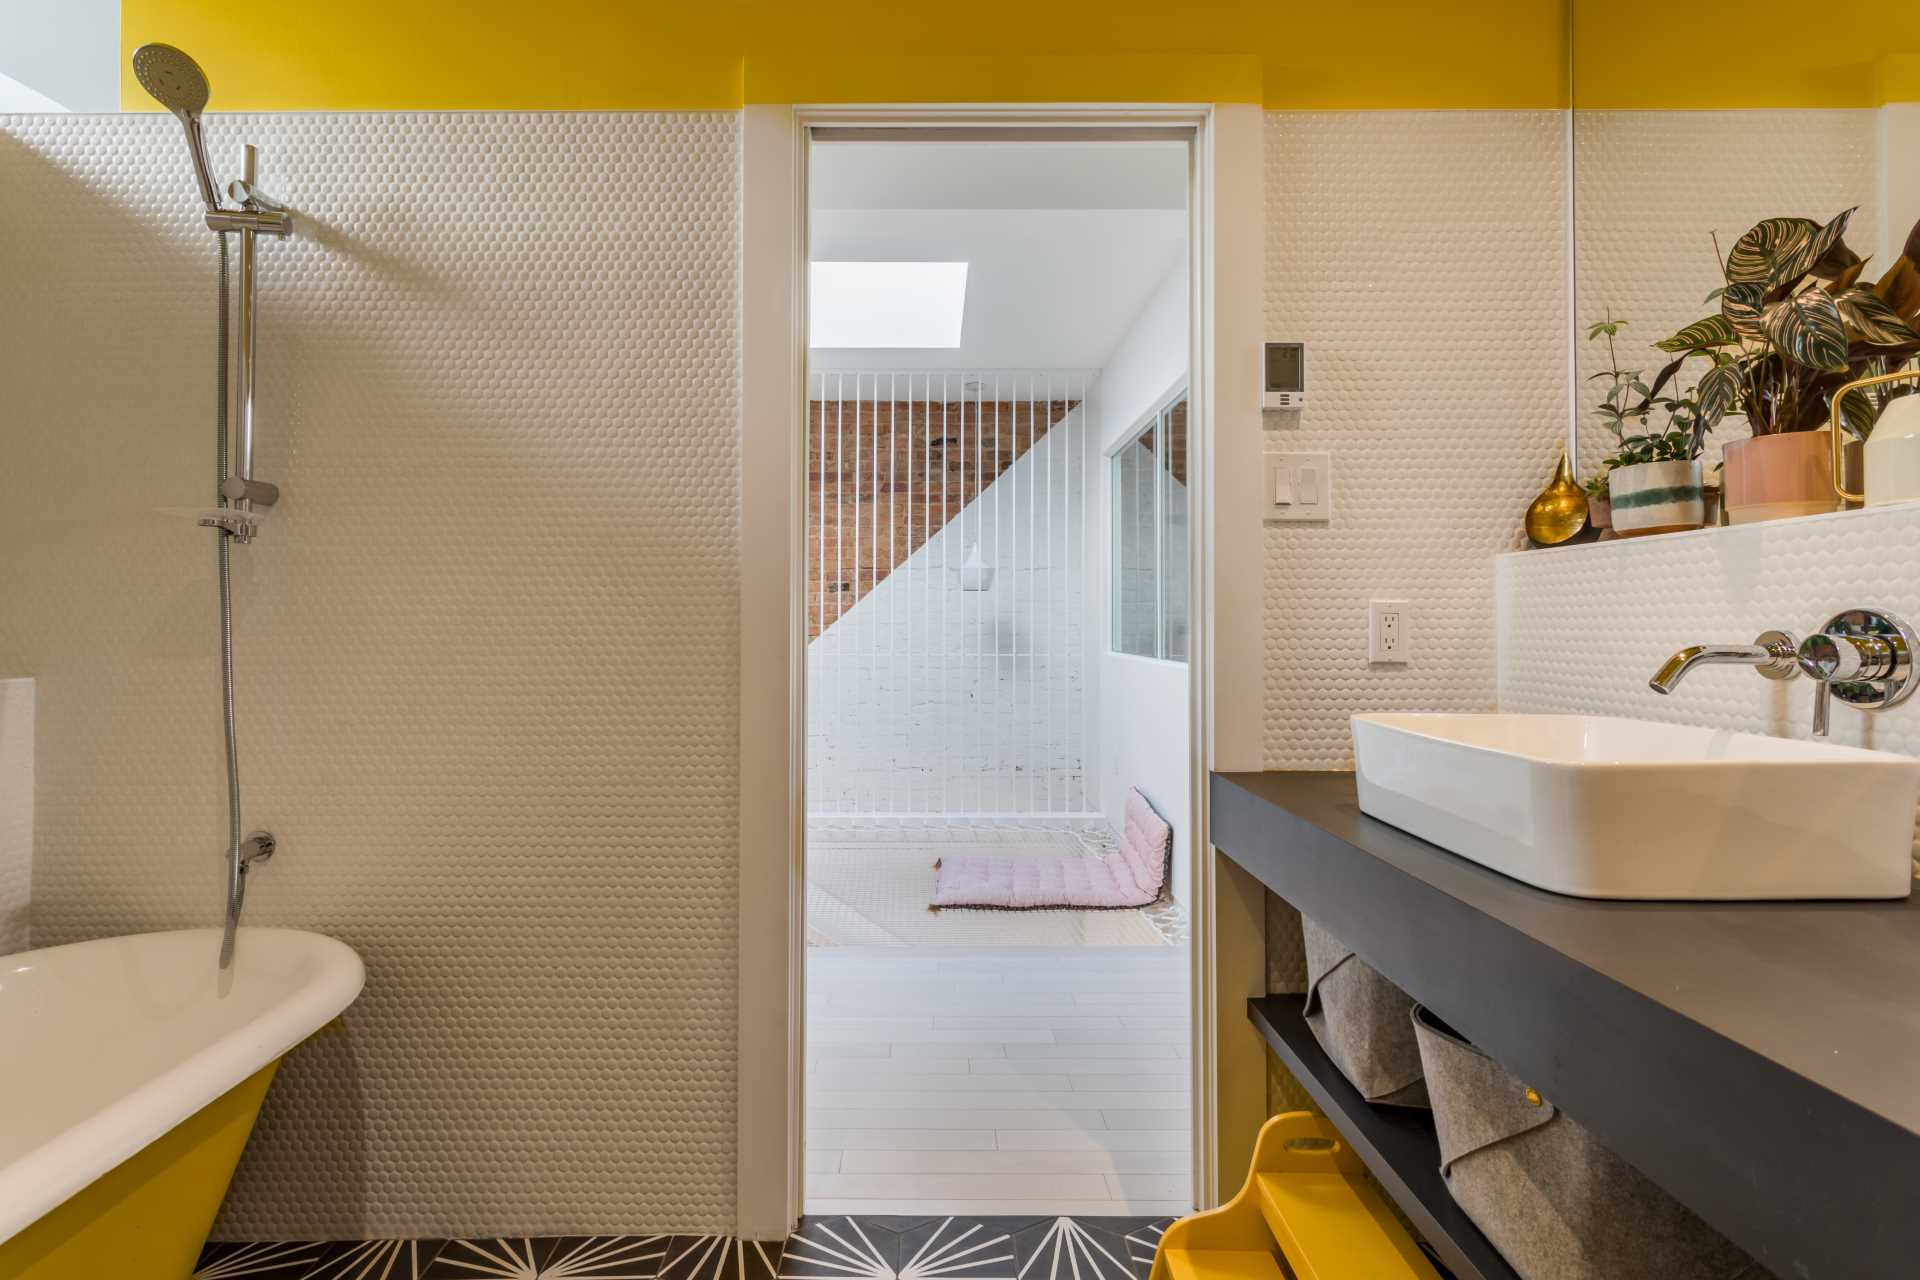 Yellow and white have been c،sen for the color palette of this modern bathroom, while black and white tiles cover the floor.